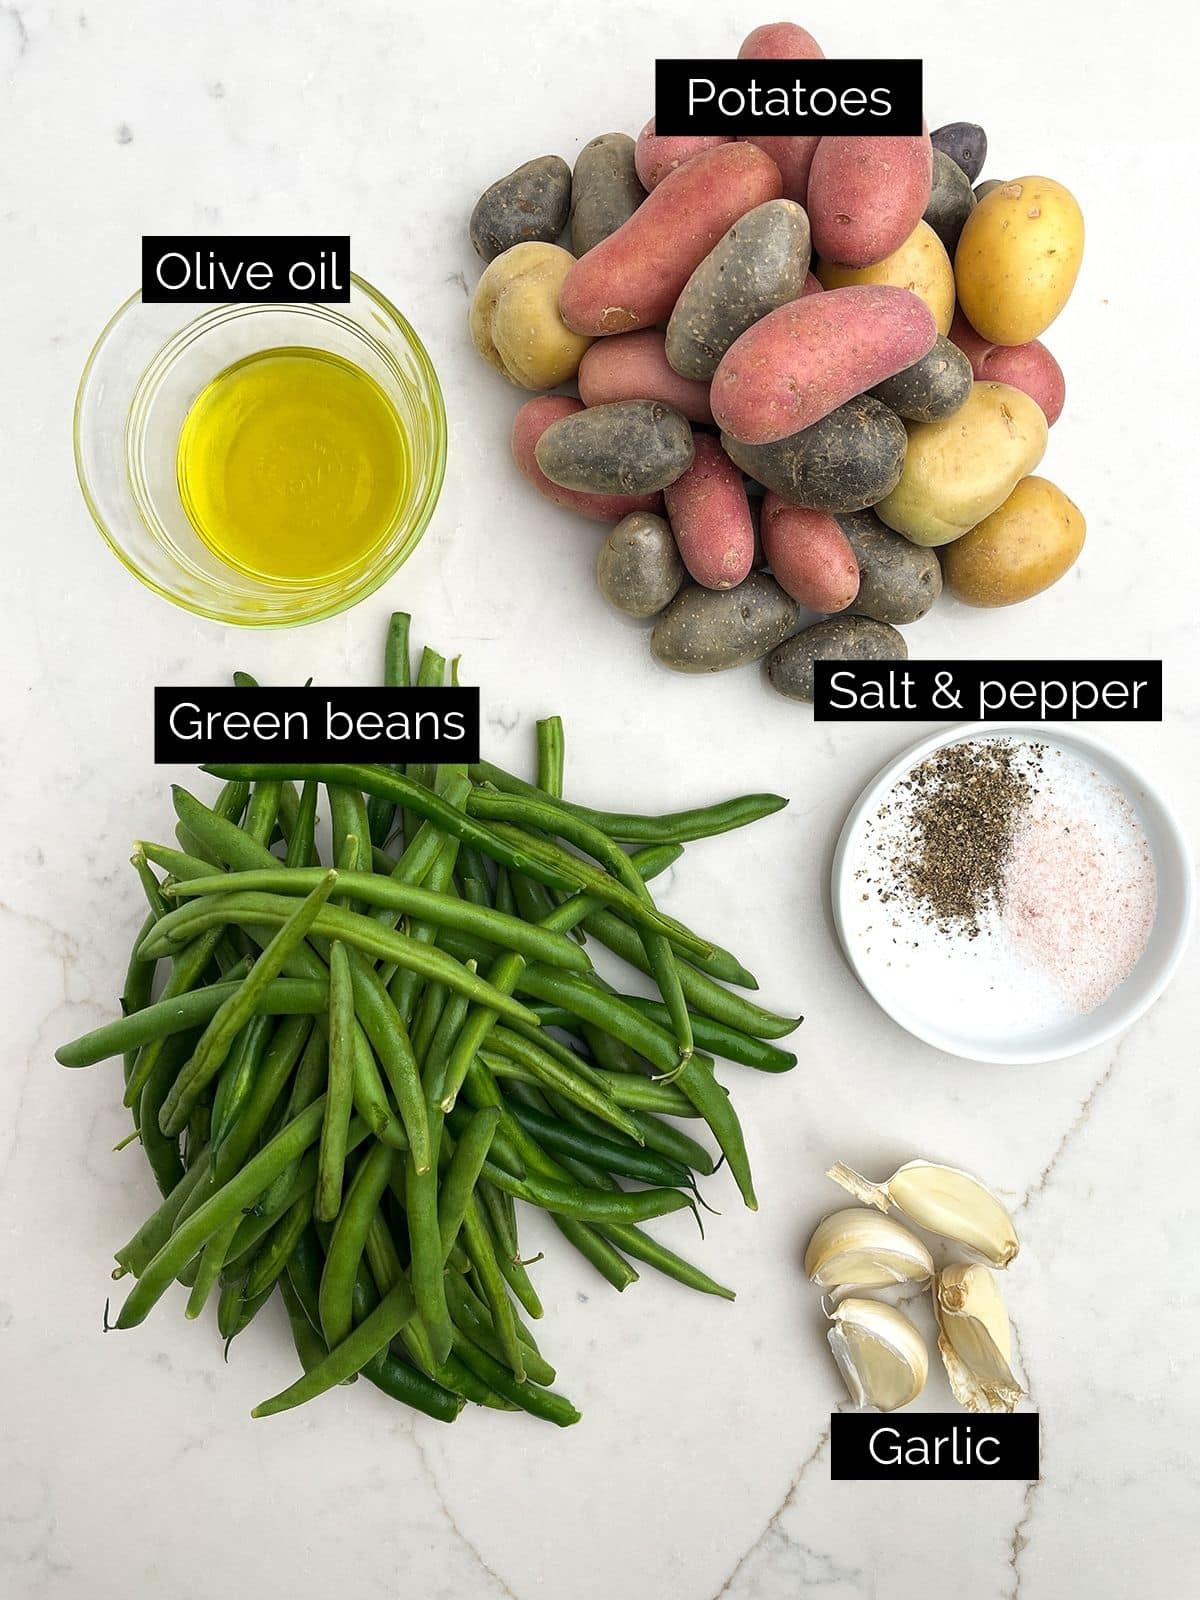 roasted potatoes and green beans ingredients